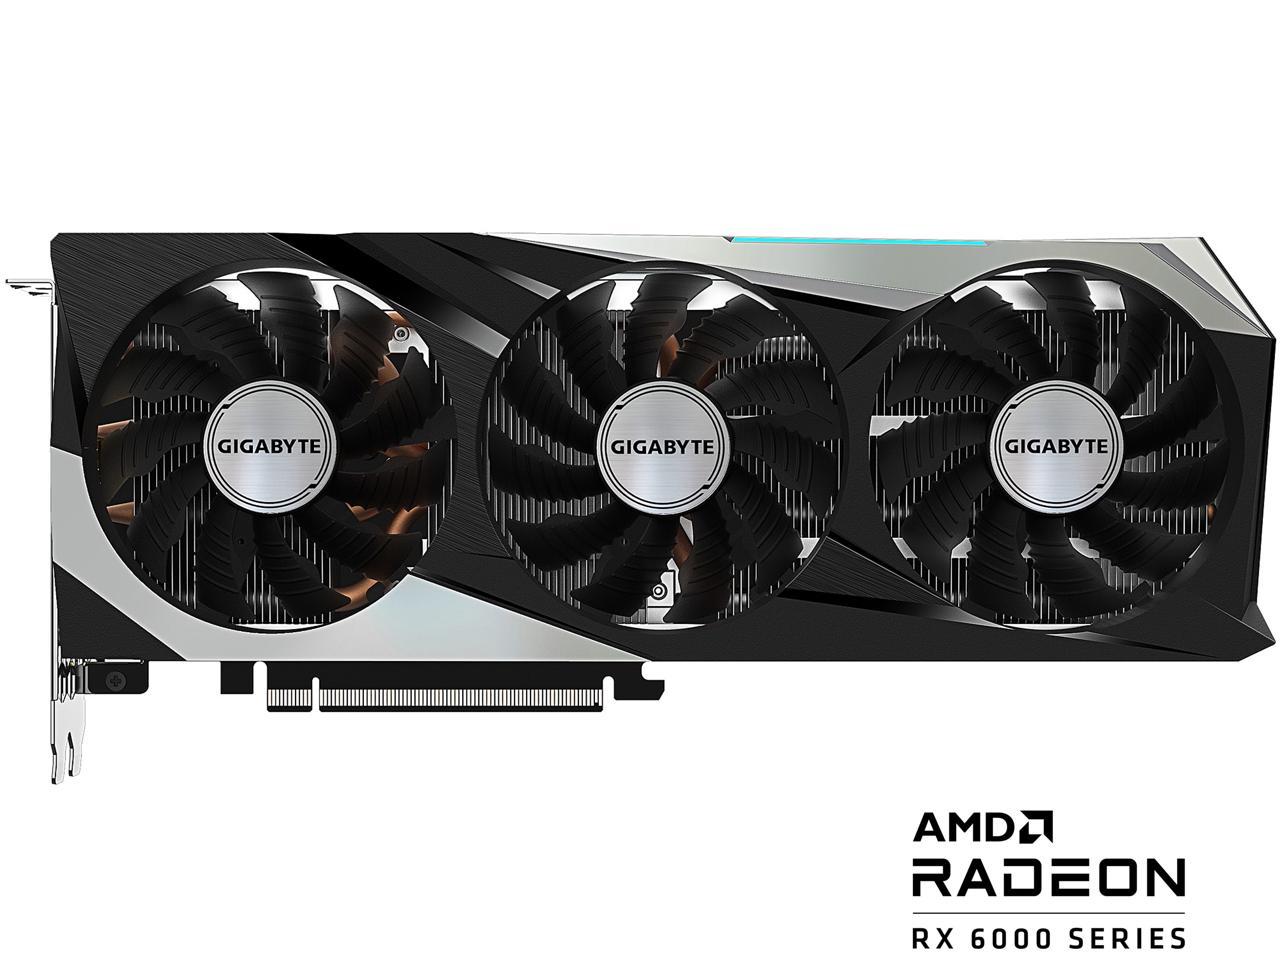 GIGABYTE Radeon RX 6800 GAMING OC 16G Graphics Card, WINDFORCE 3X Cooling  System, 16GB 256-bit GDDR6, GV-R68GAMING OC-16GD Video Card, Powered by AMD  